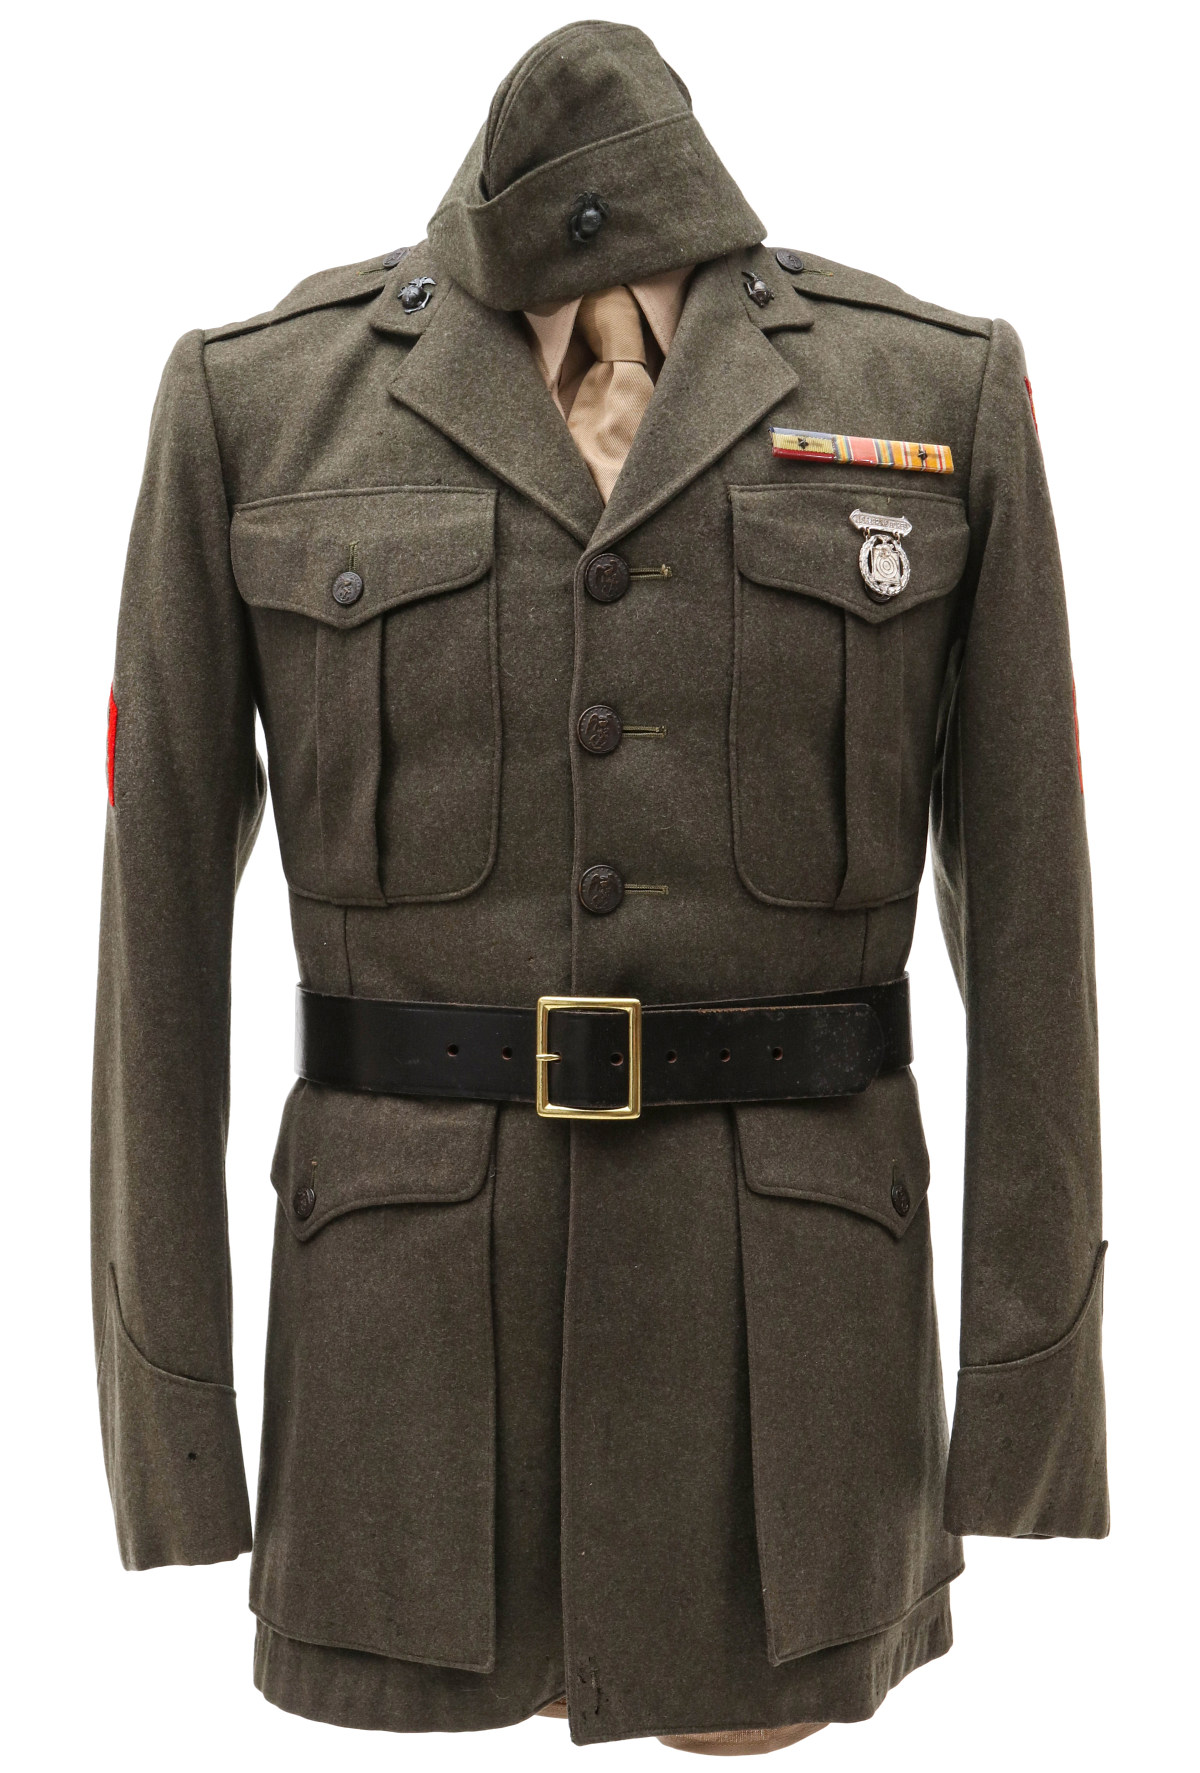 UNIFORM OF SGT HASKELL H. NEAL 1ST MARINE AIR WING